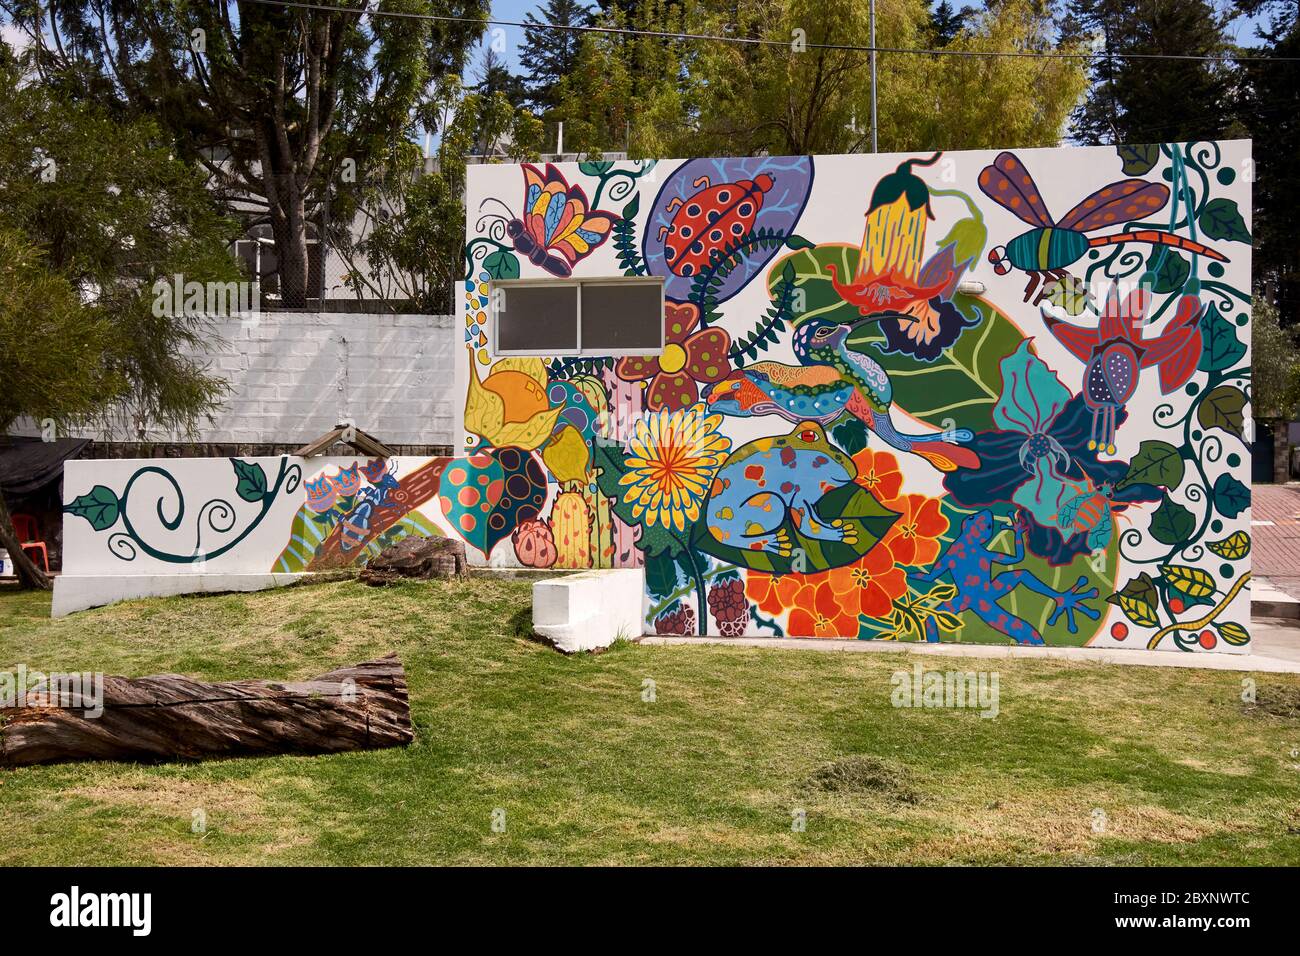 Children's mural in play area Quito Stock Photo